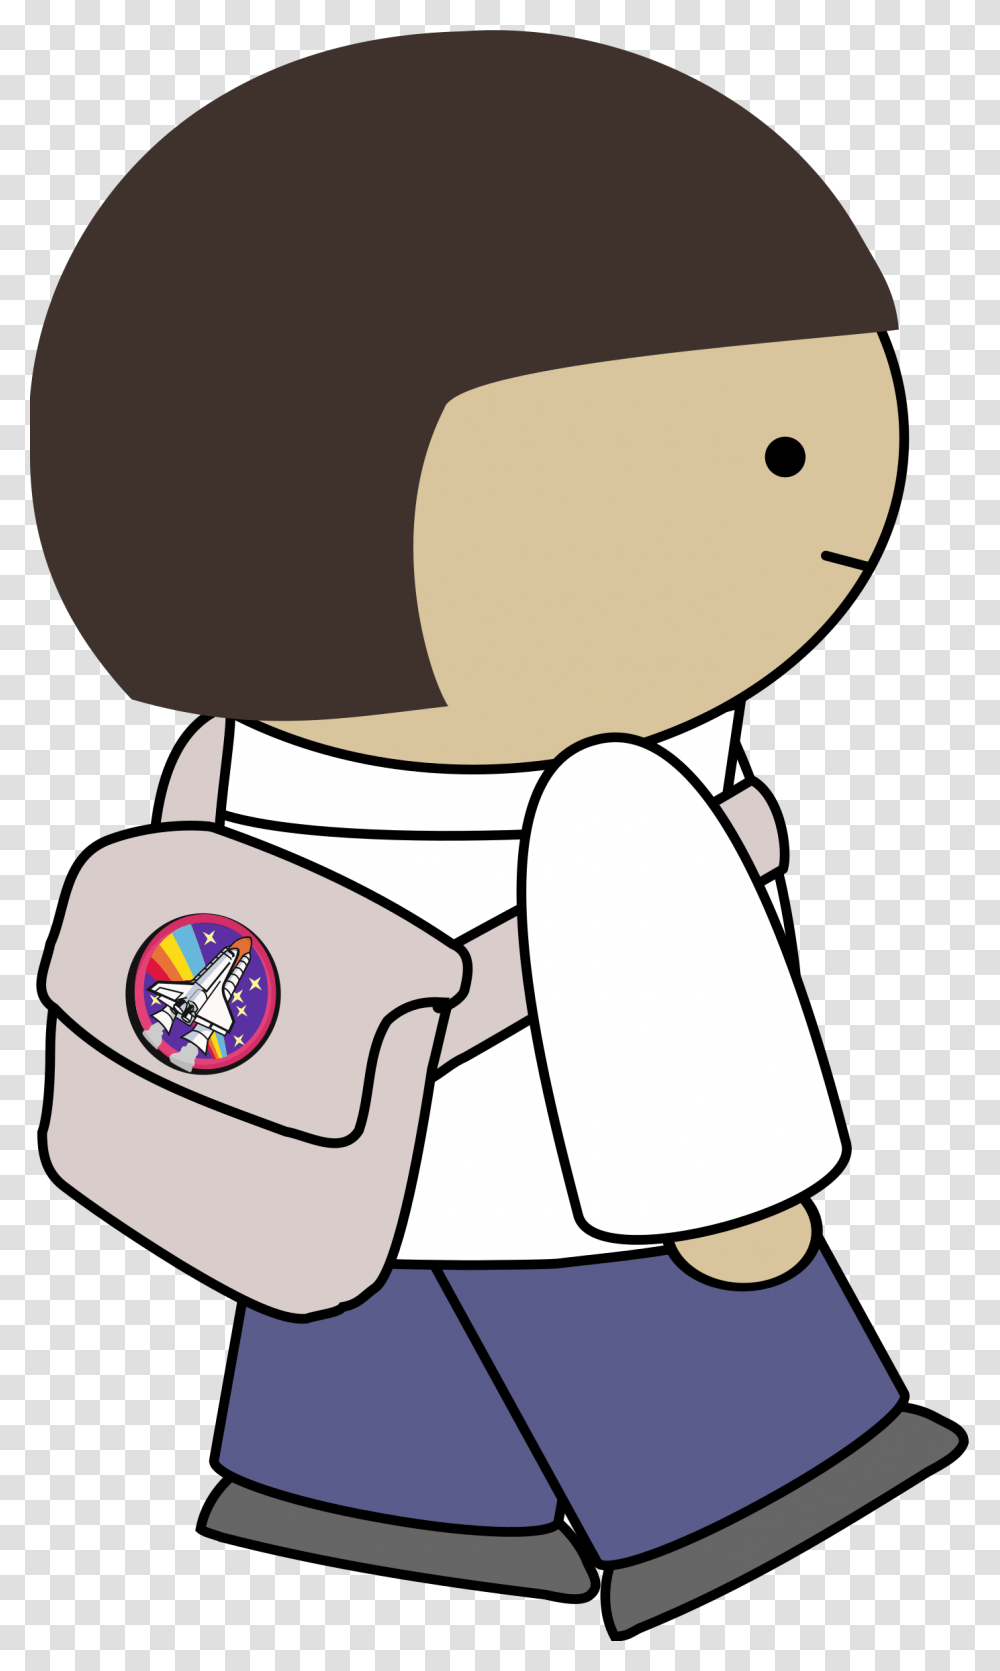 Clipart Backpack Small Backpack Cartoon Character With Backpack, Nurse, Chef, Smelling, Sailor Suit Transparent Png